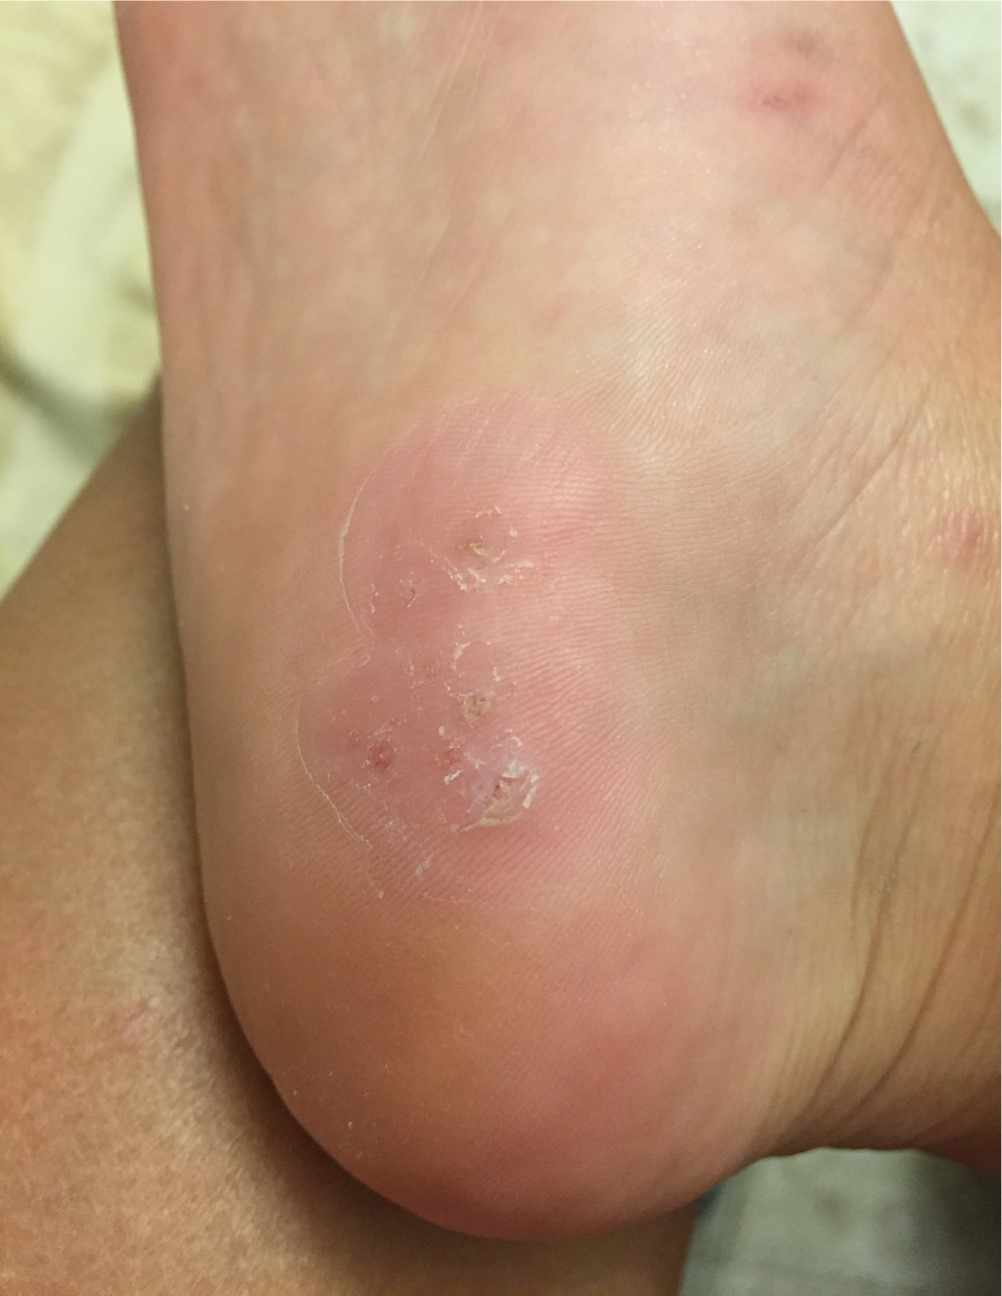 wart on foot or blister)